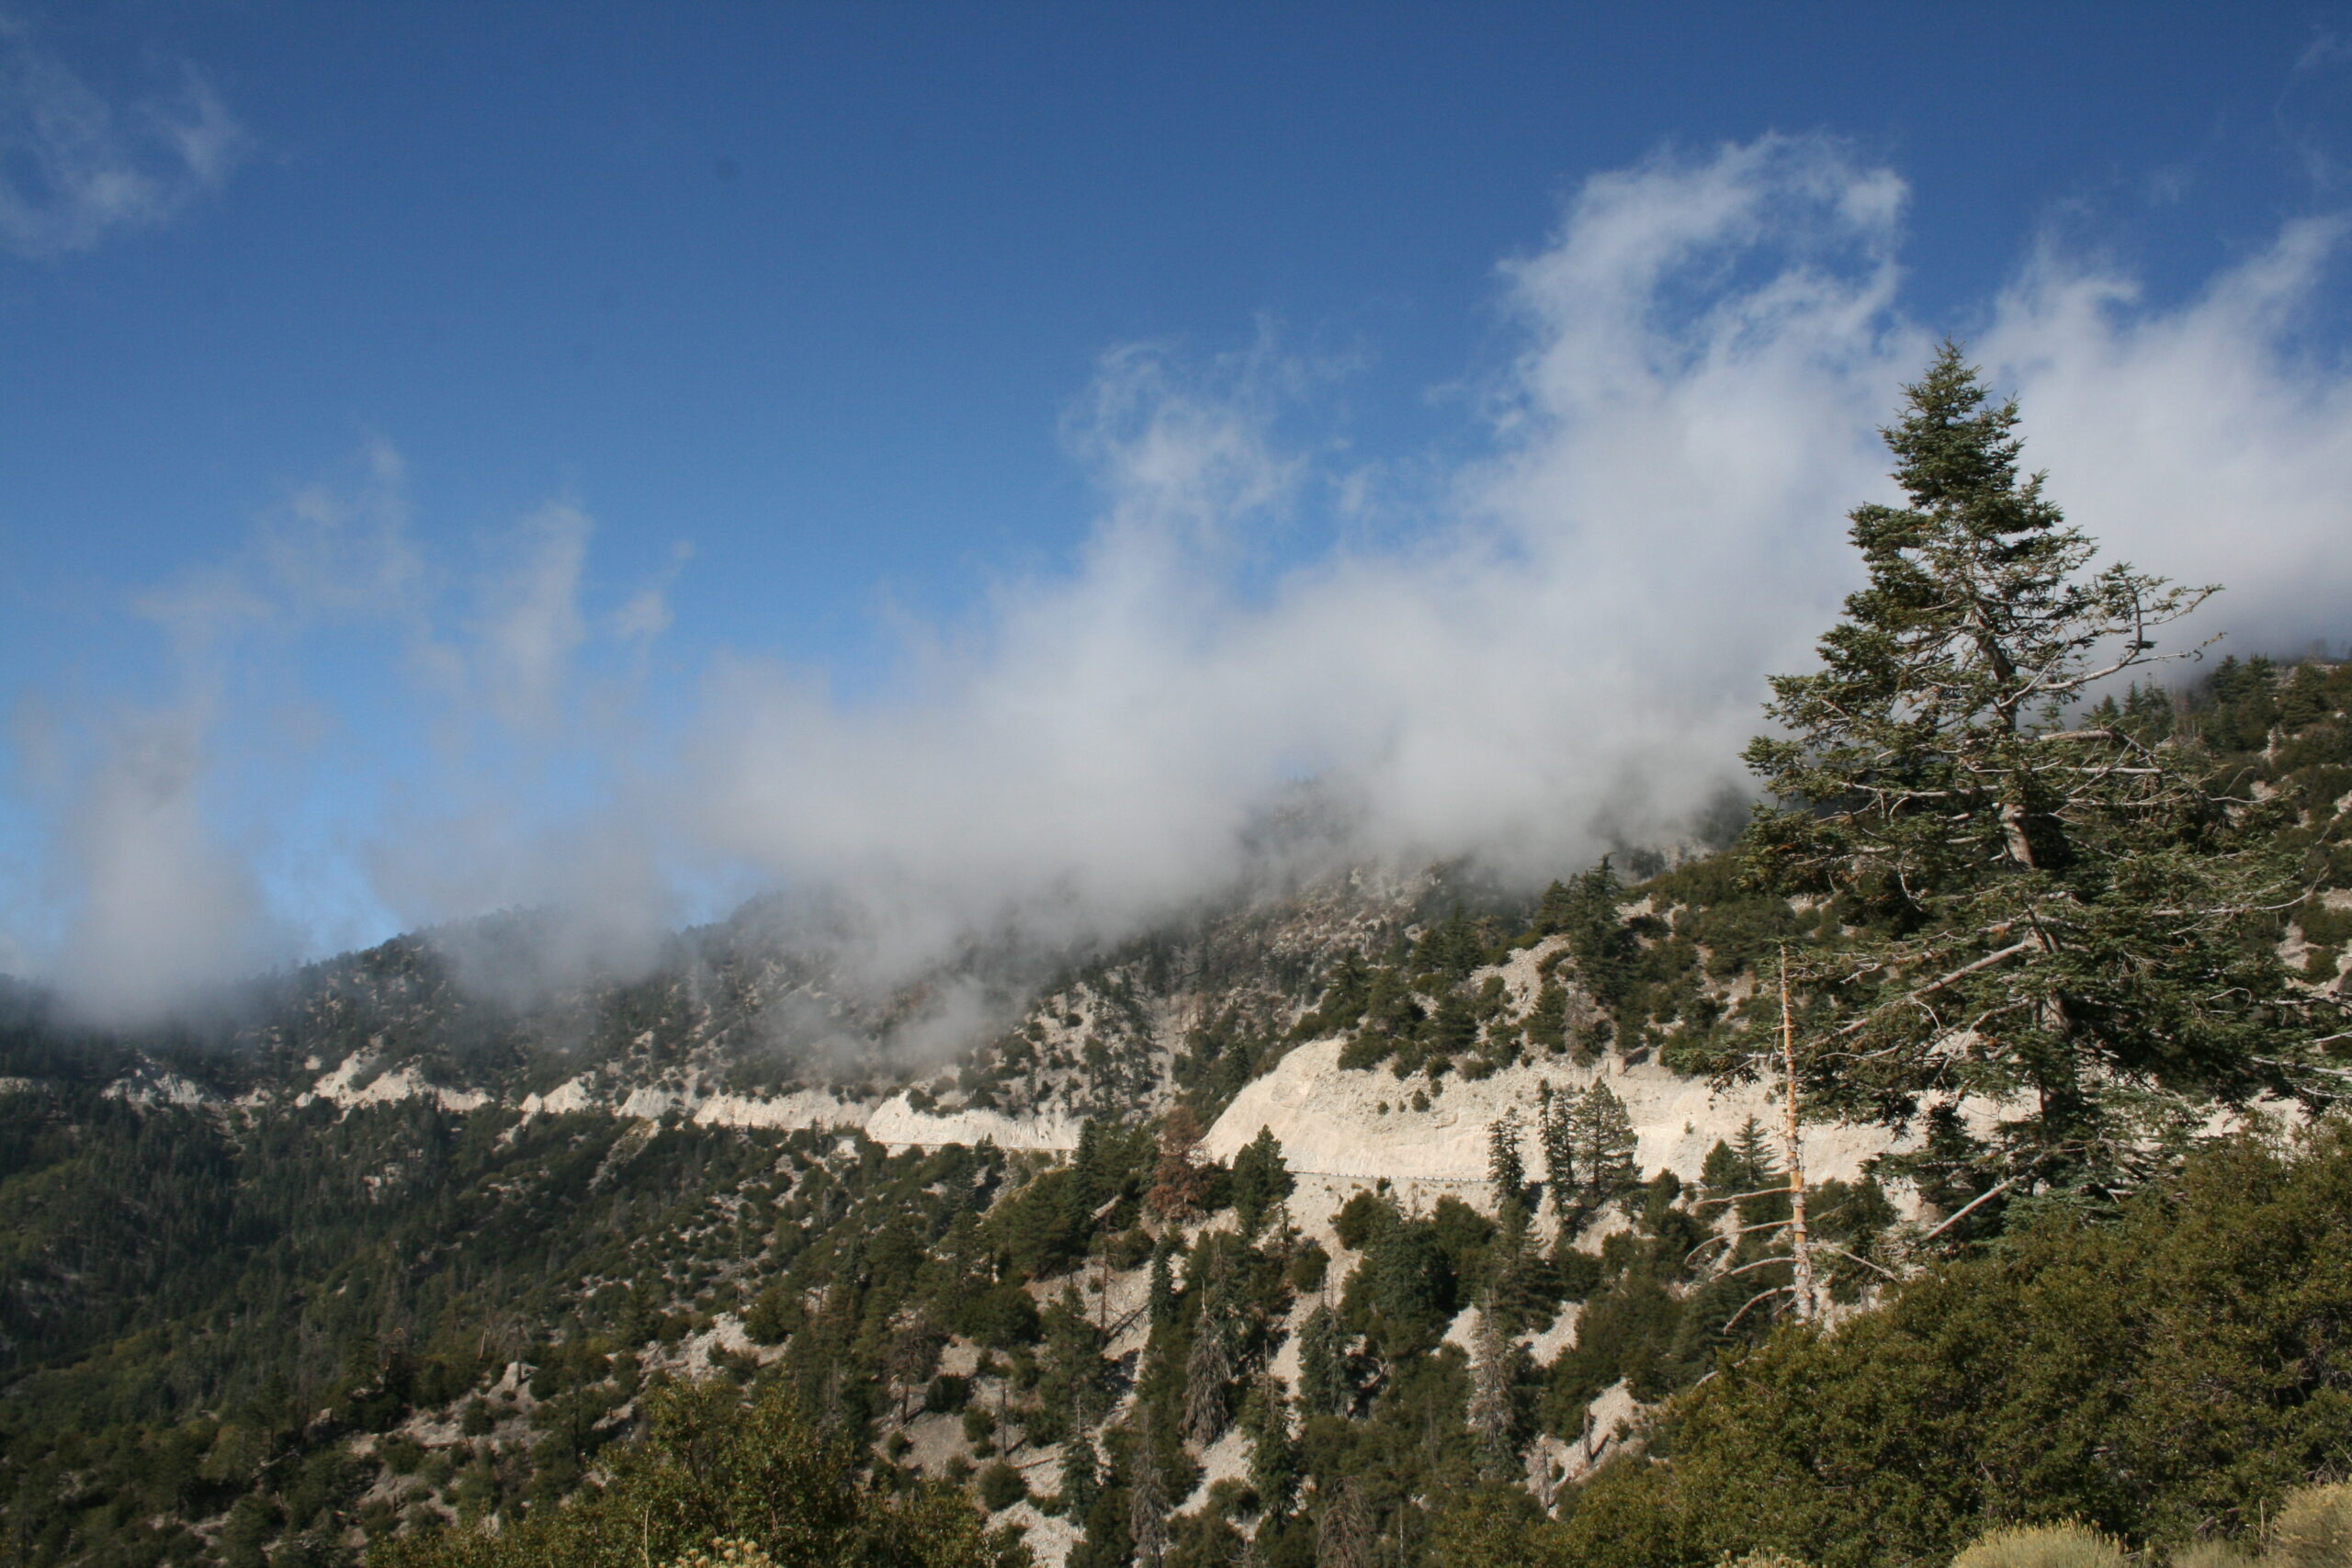 Clouds hover over the winding road to Big Bear Lake, California.